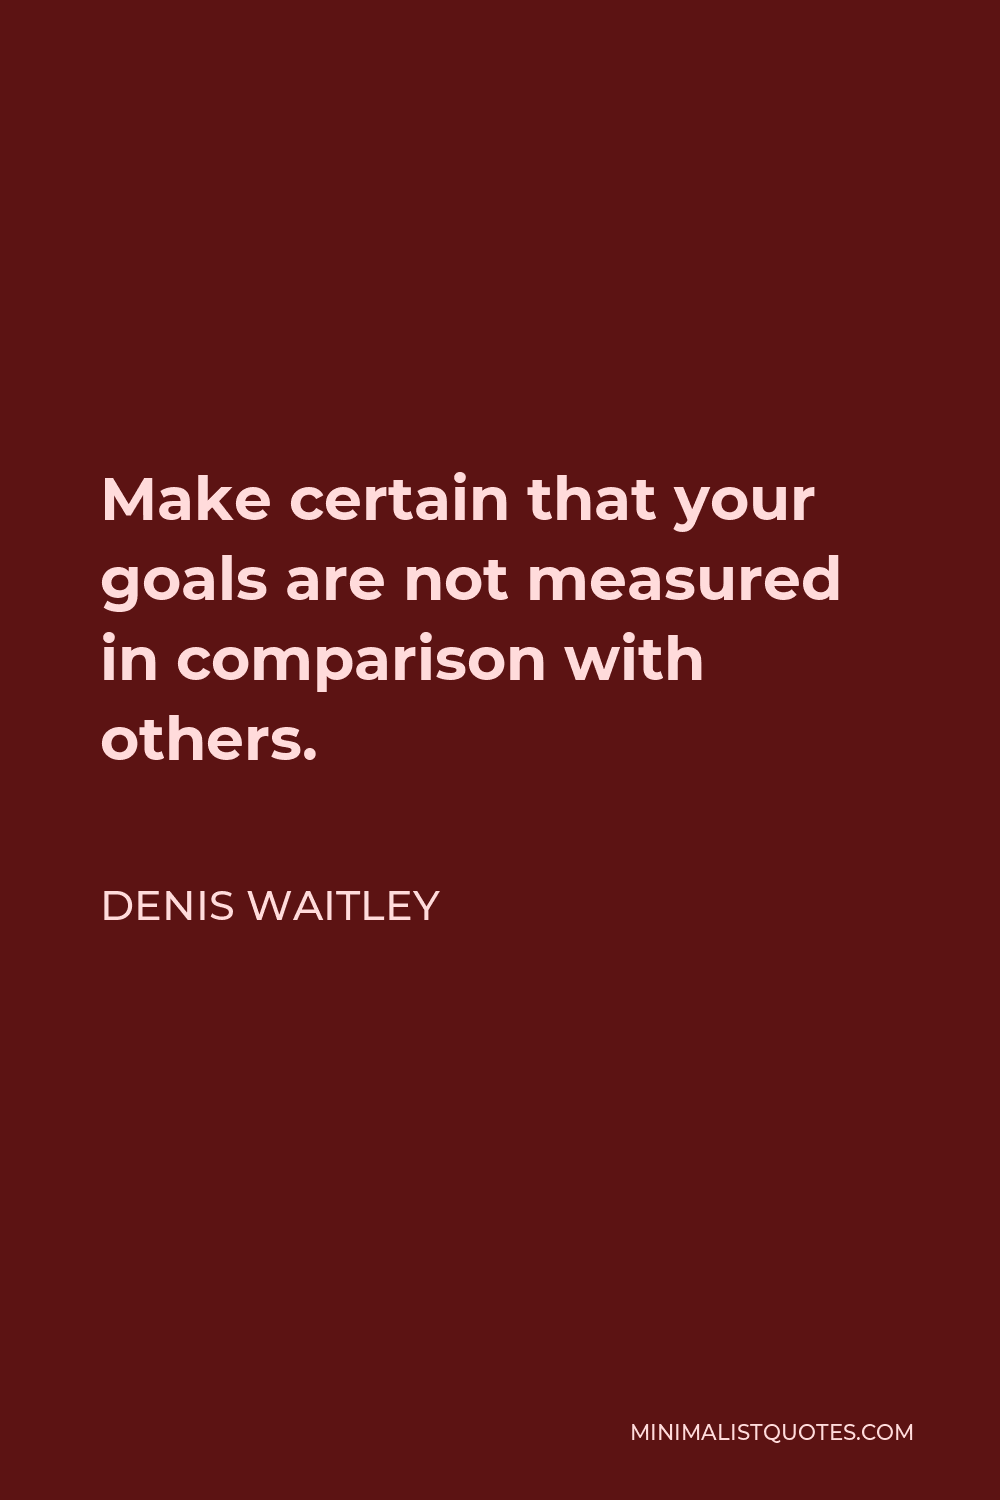 Denis Waitley Quote - Make certain that your goals are not measured in comparison with others.